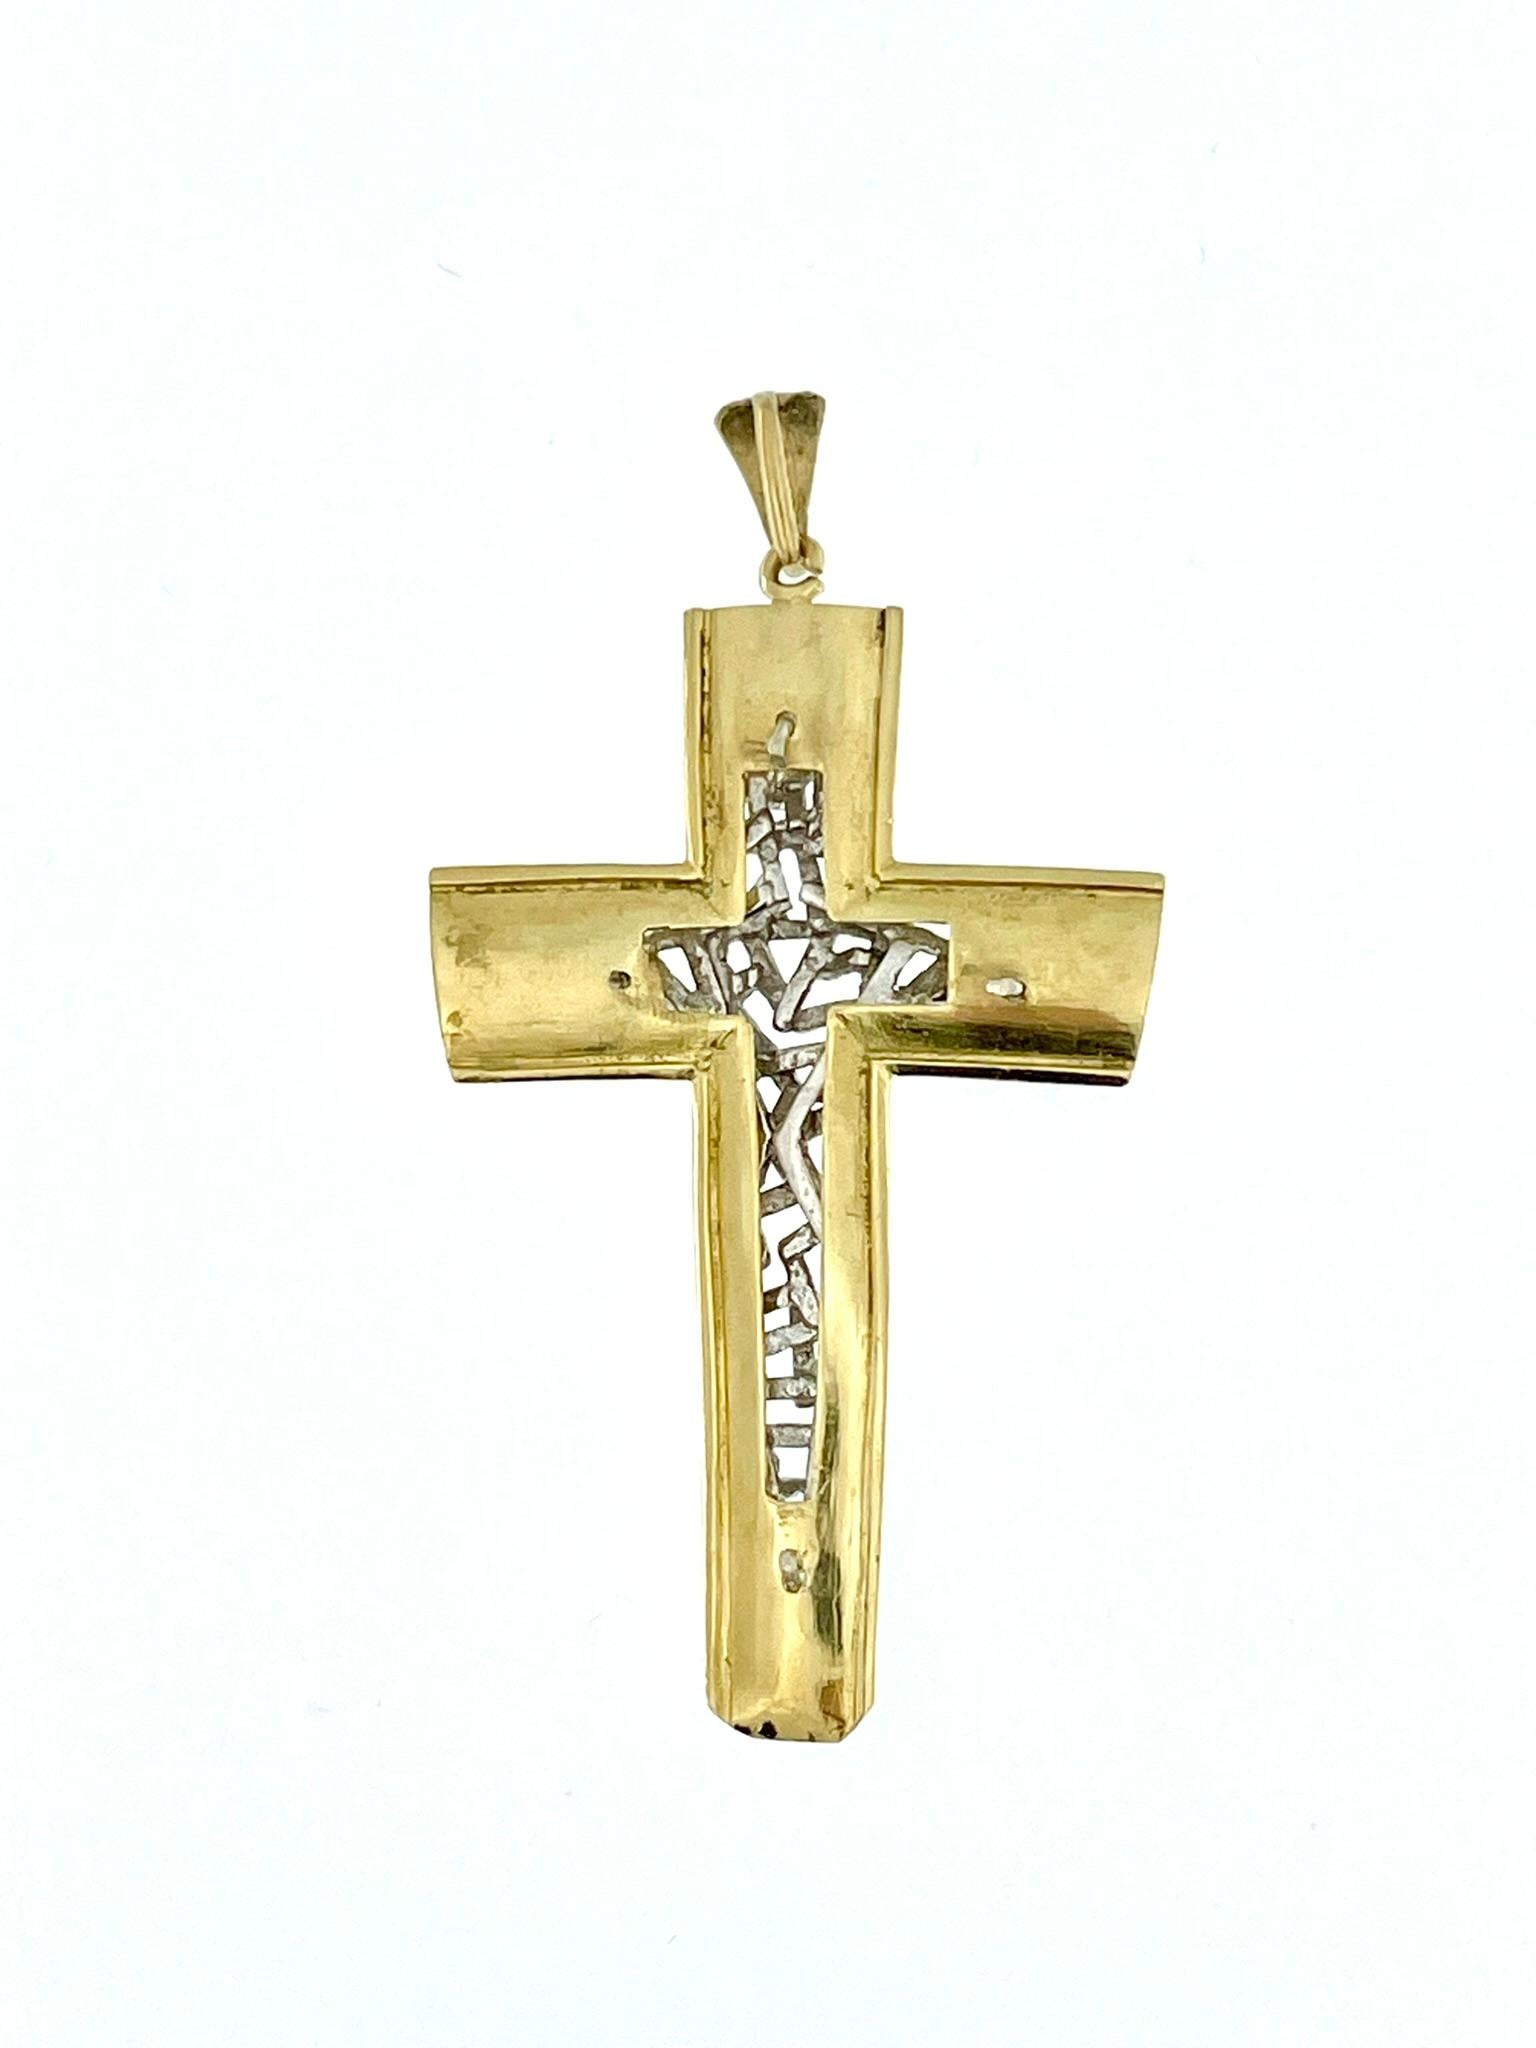 The Hand-Made 18kt Gold Italian Crucifix is a meticulously crafted religious pendant that exudes elegance and craftsmanship. The crucifix is made from 18-karat gold, providing a luxurious and enduring quality. The use of both yellow and white gold